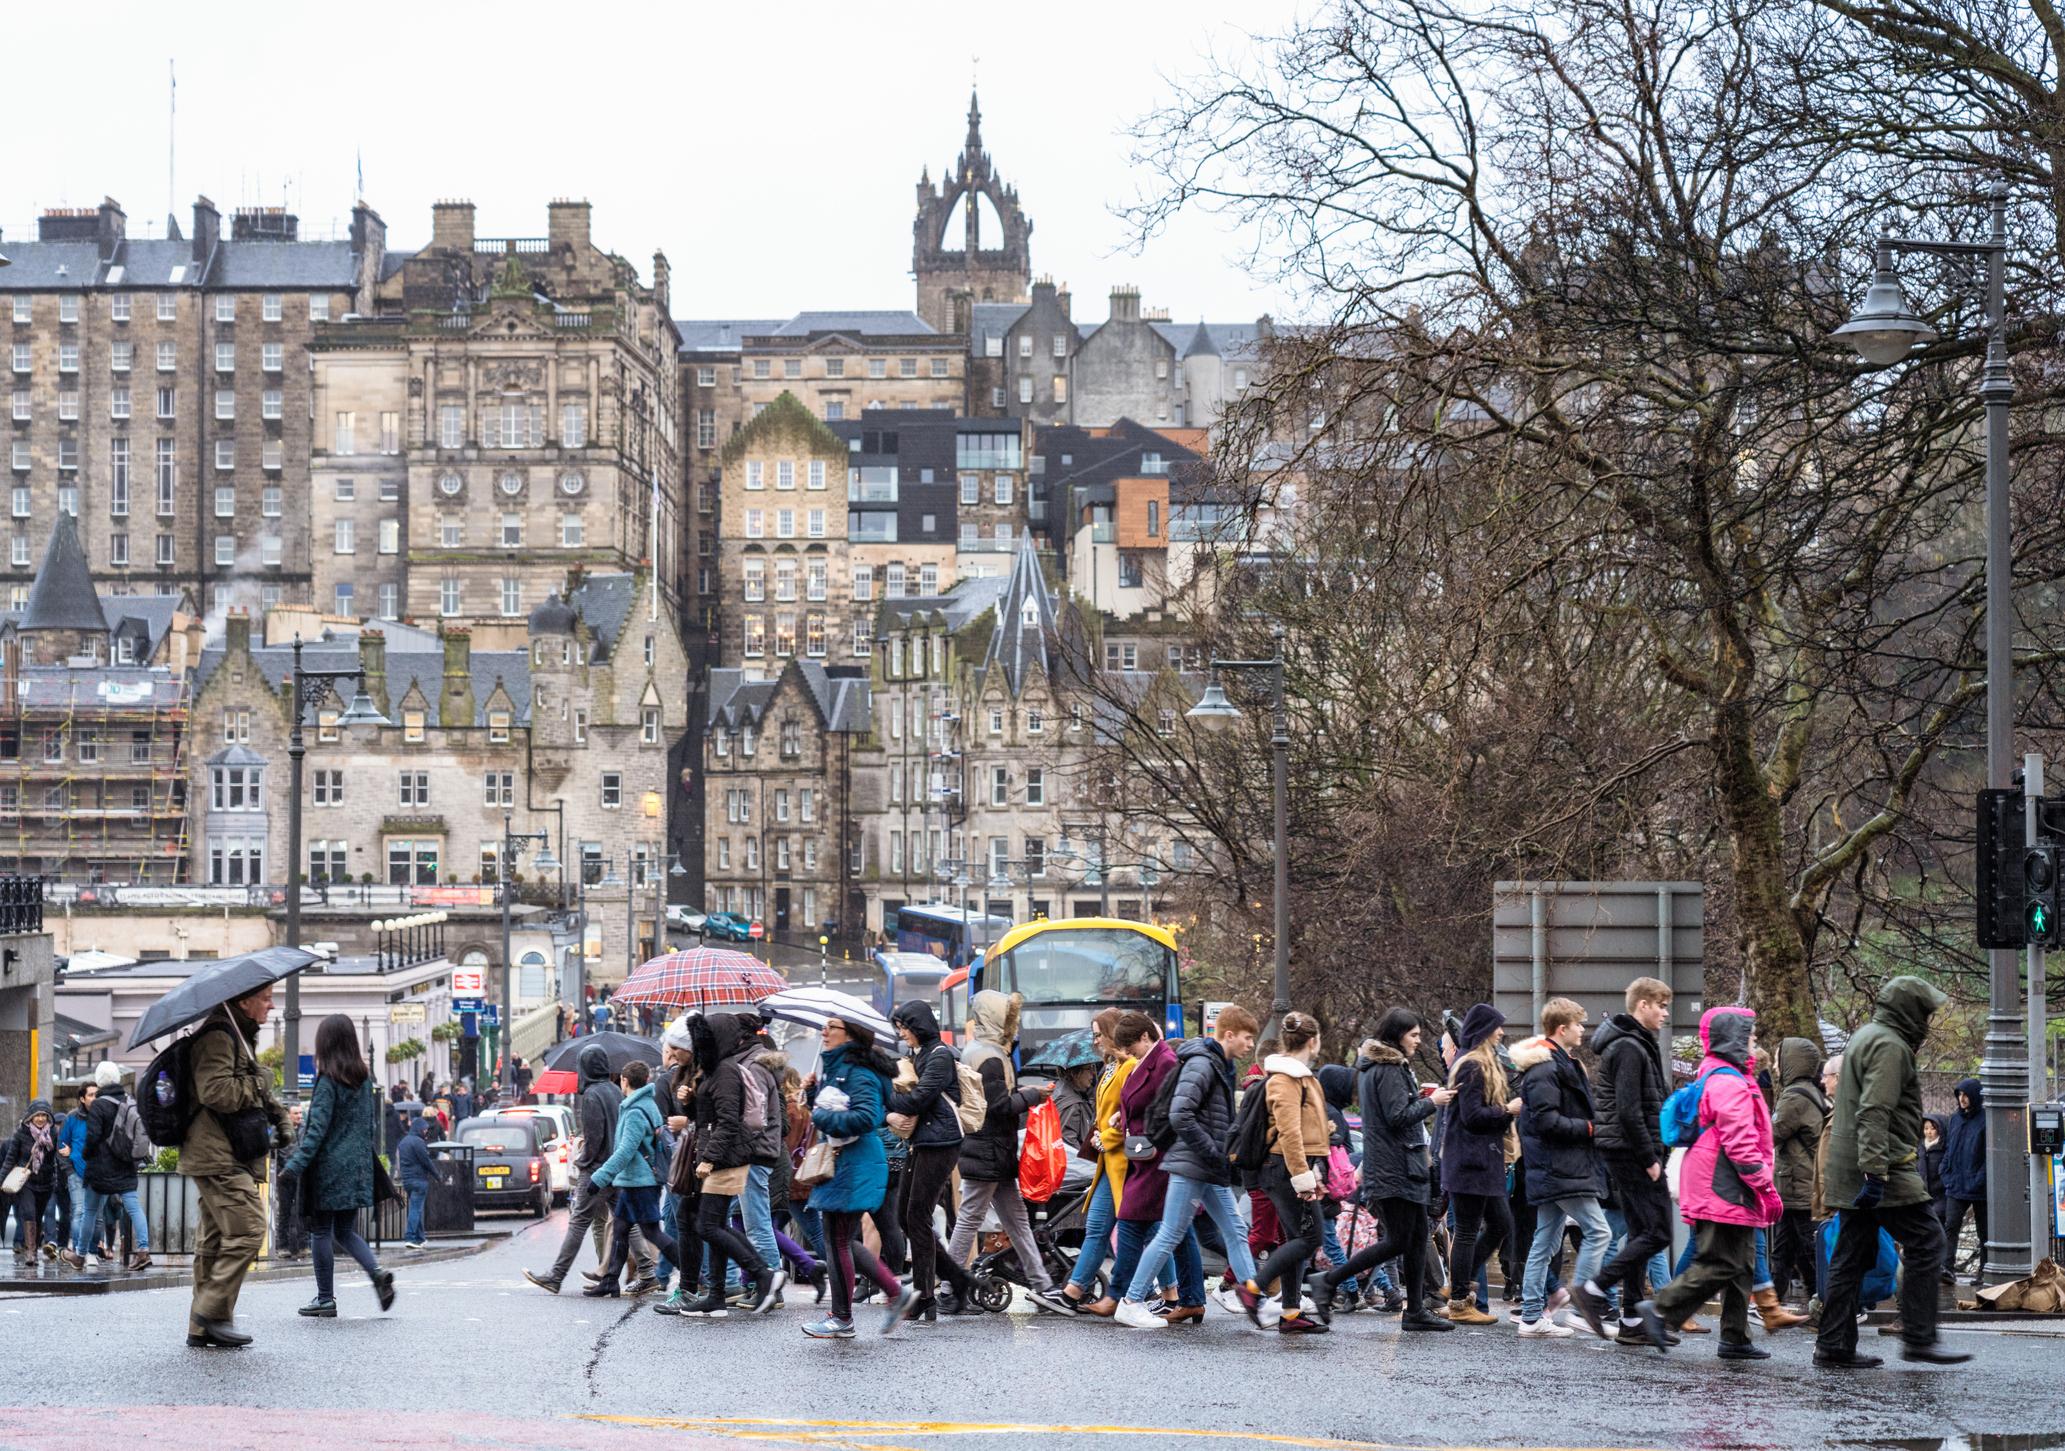 Pedestrians crossing Waverley Bridge in central Edinburgh, with a skyline of the city's Old Town in the background.